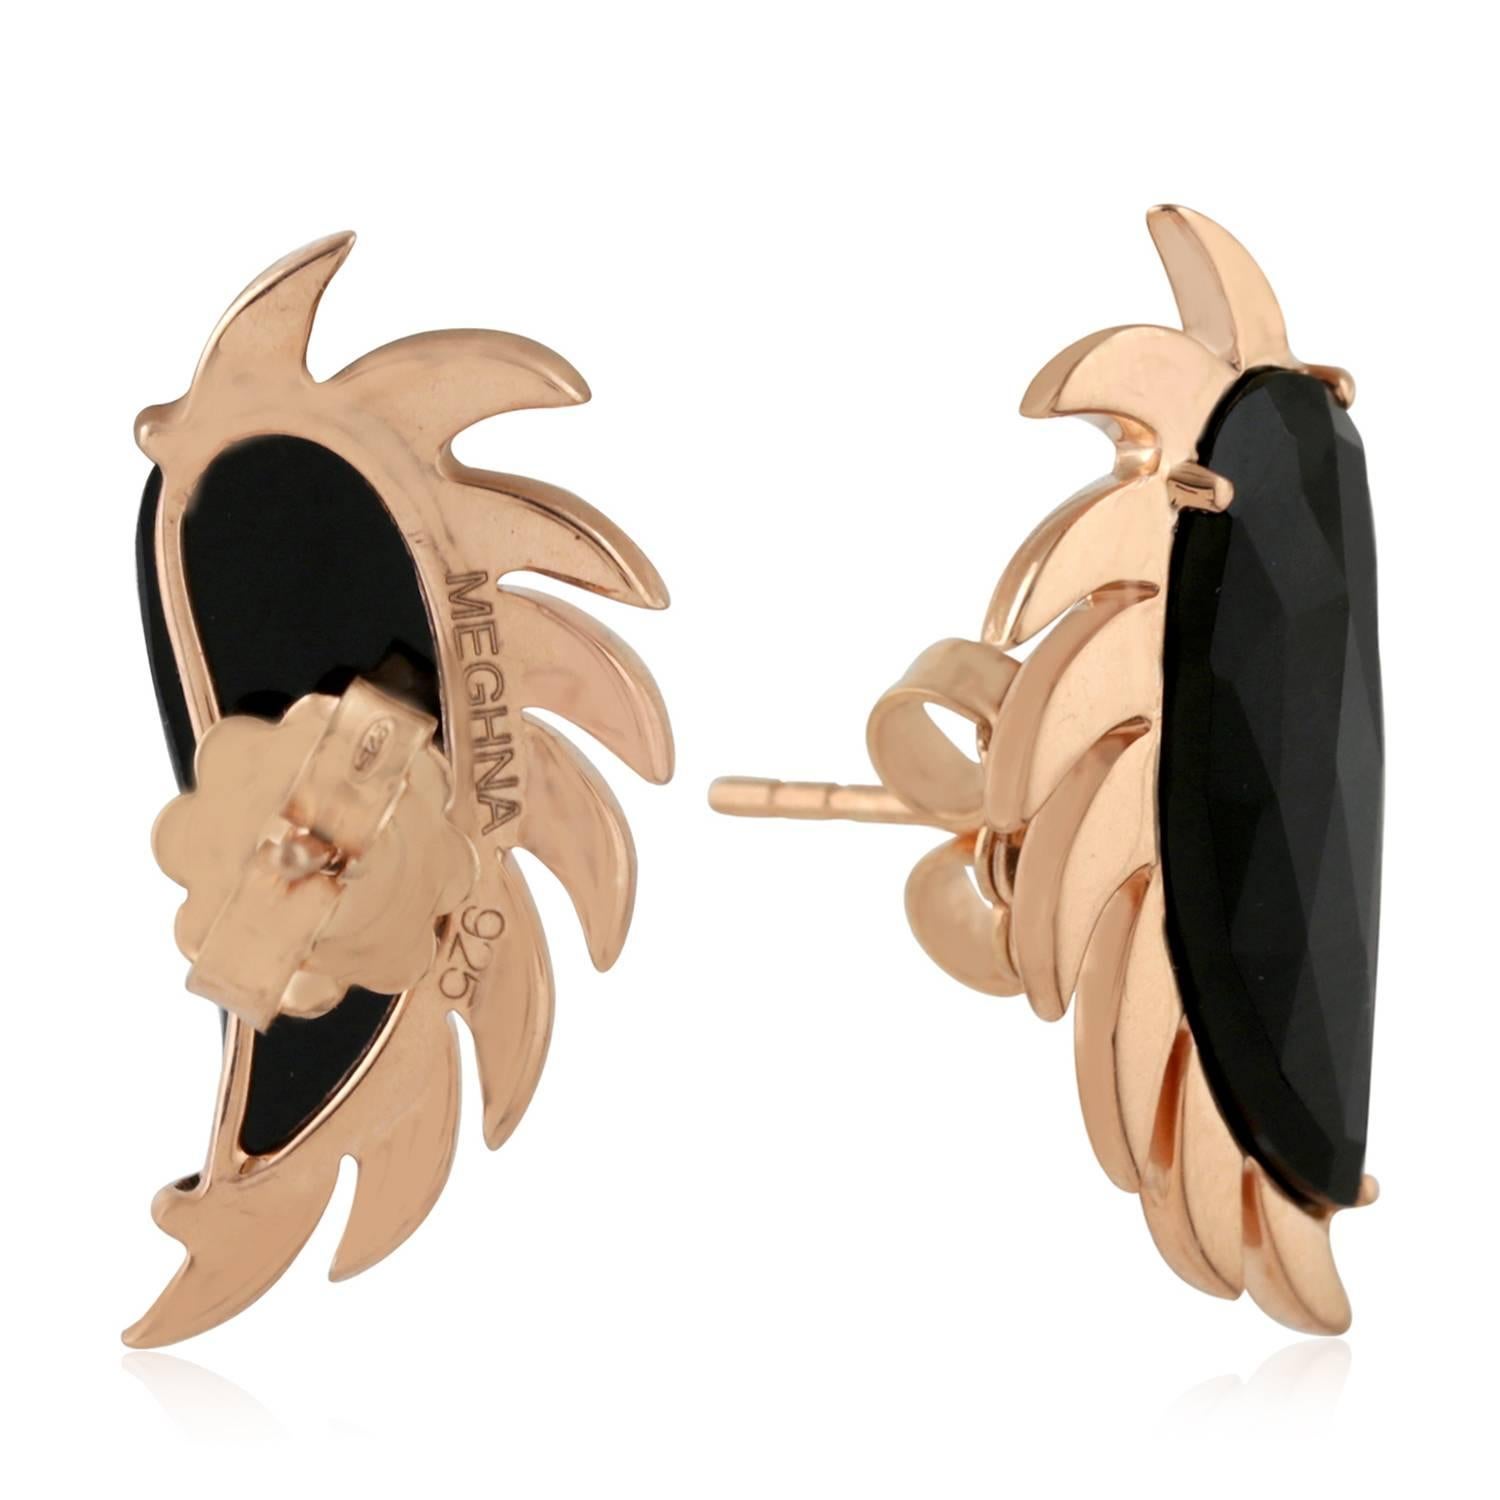 These distinctive stud earrings are modern twist to fine jewelry, handcrafted in 18K gold, sterling silver and black onyx. The iridescent 16.0-ct rose cut black onyx is surrounded by 